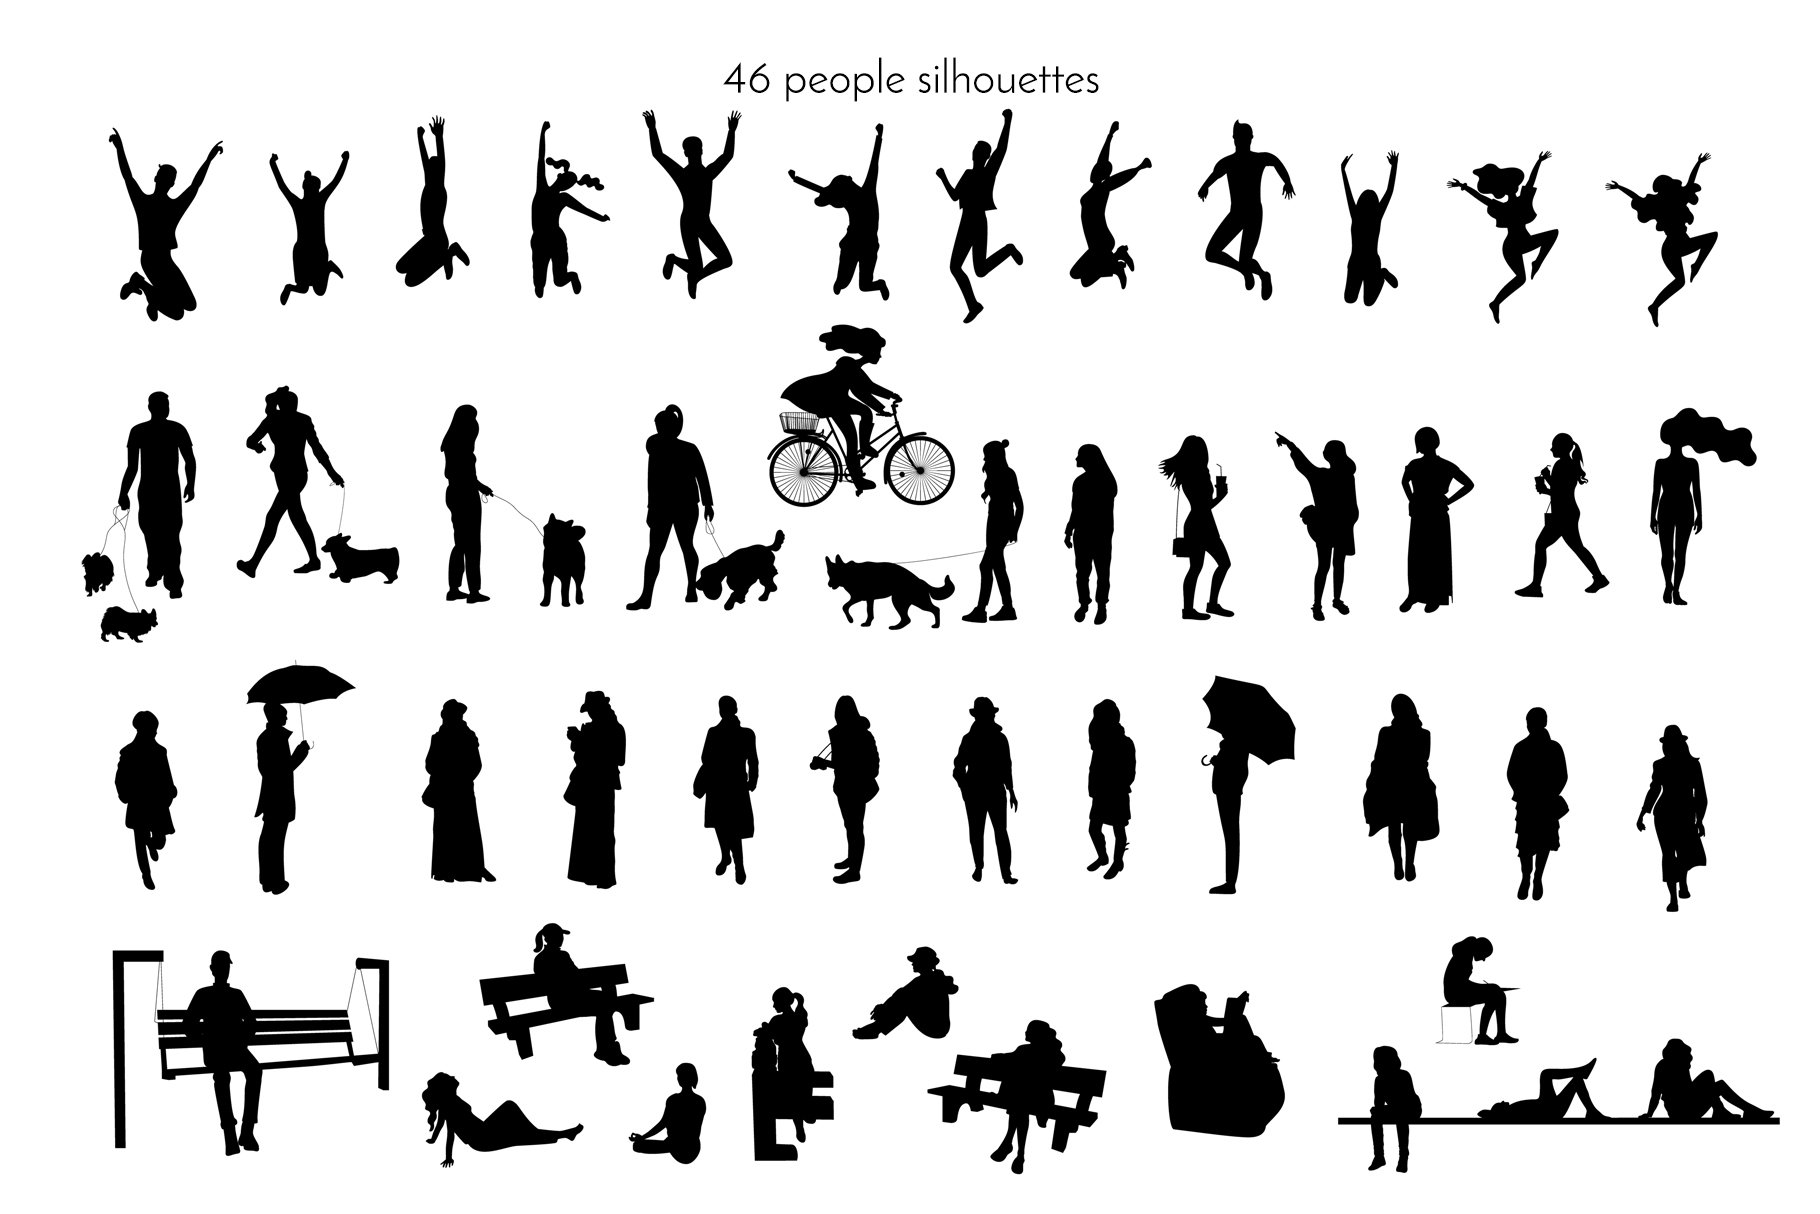 46 people silhouettes.